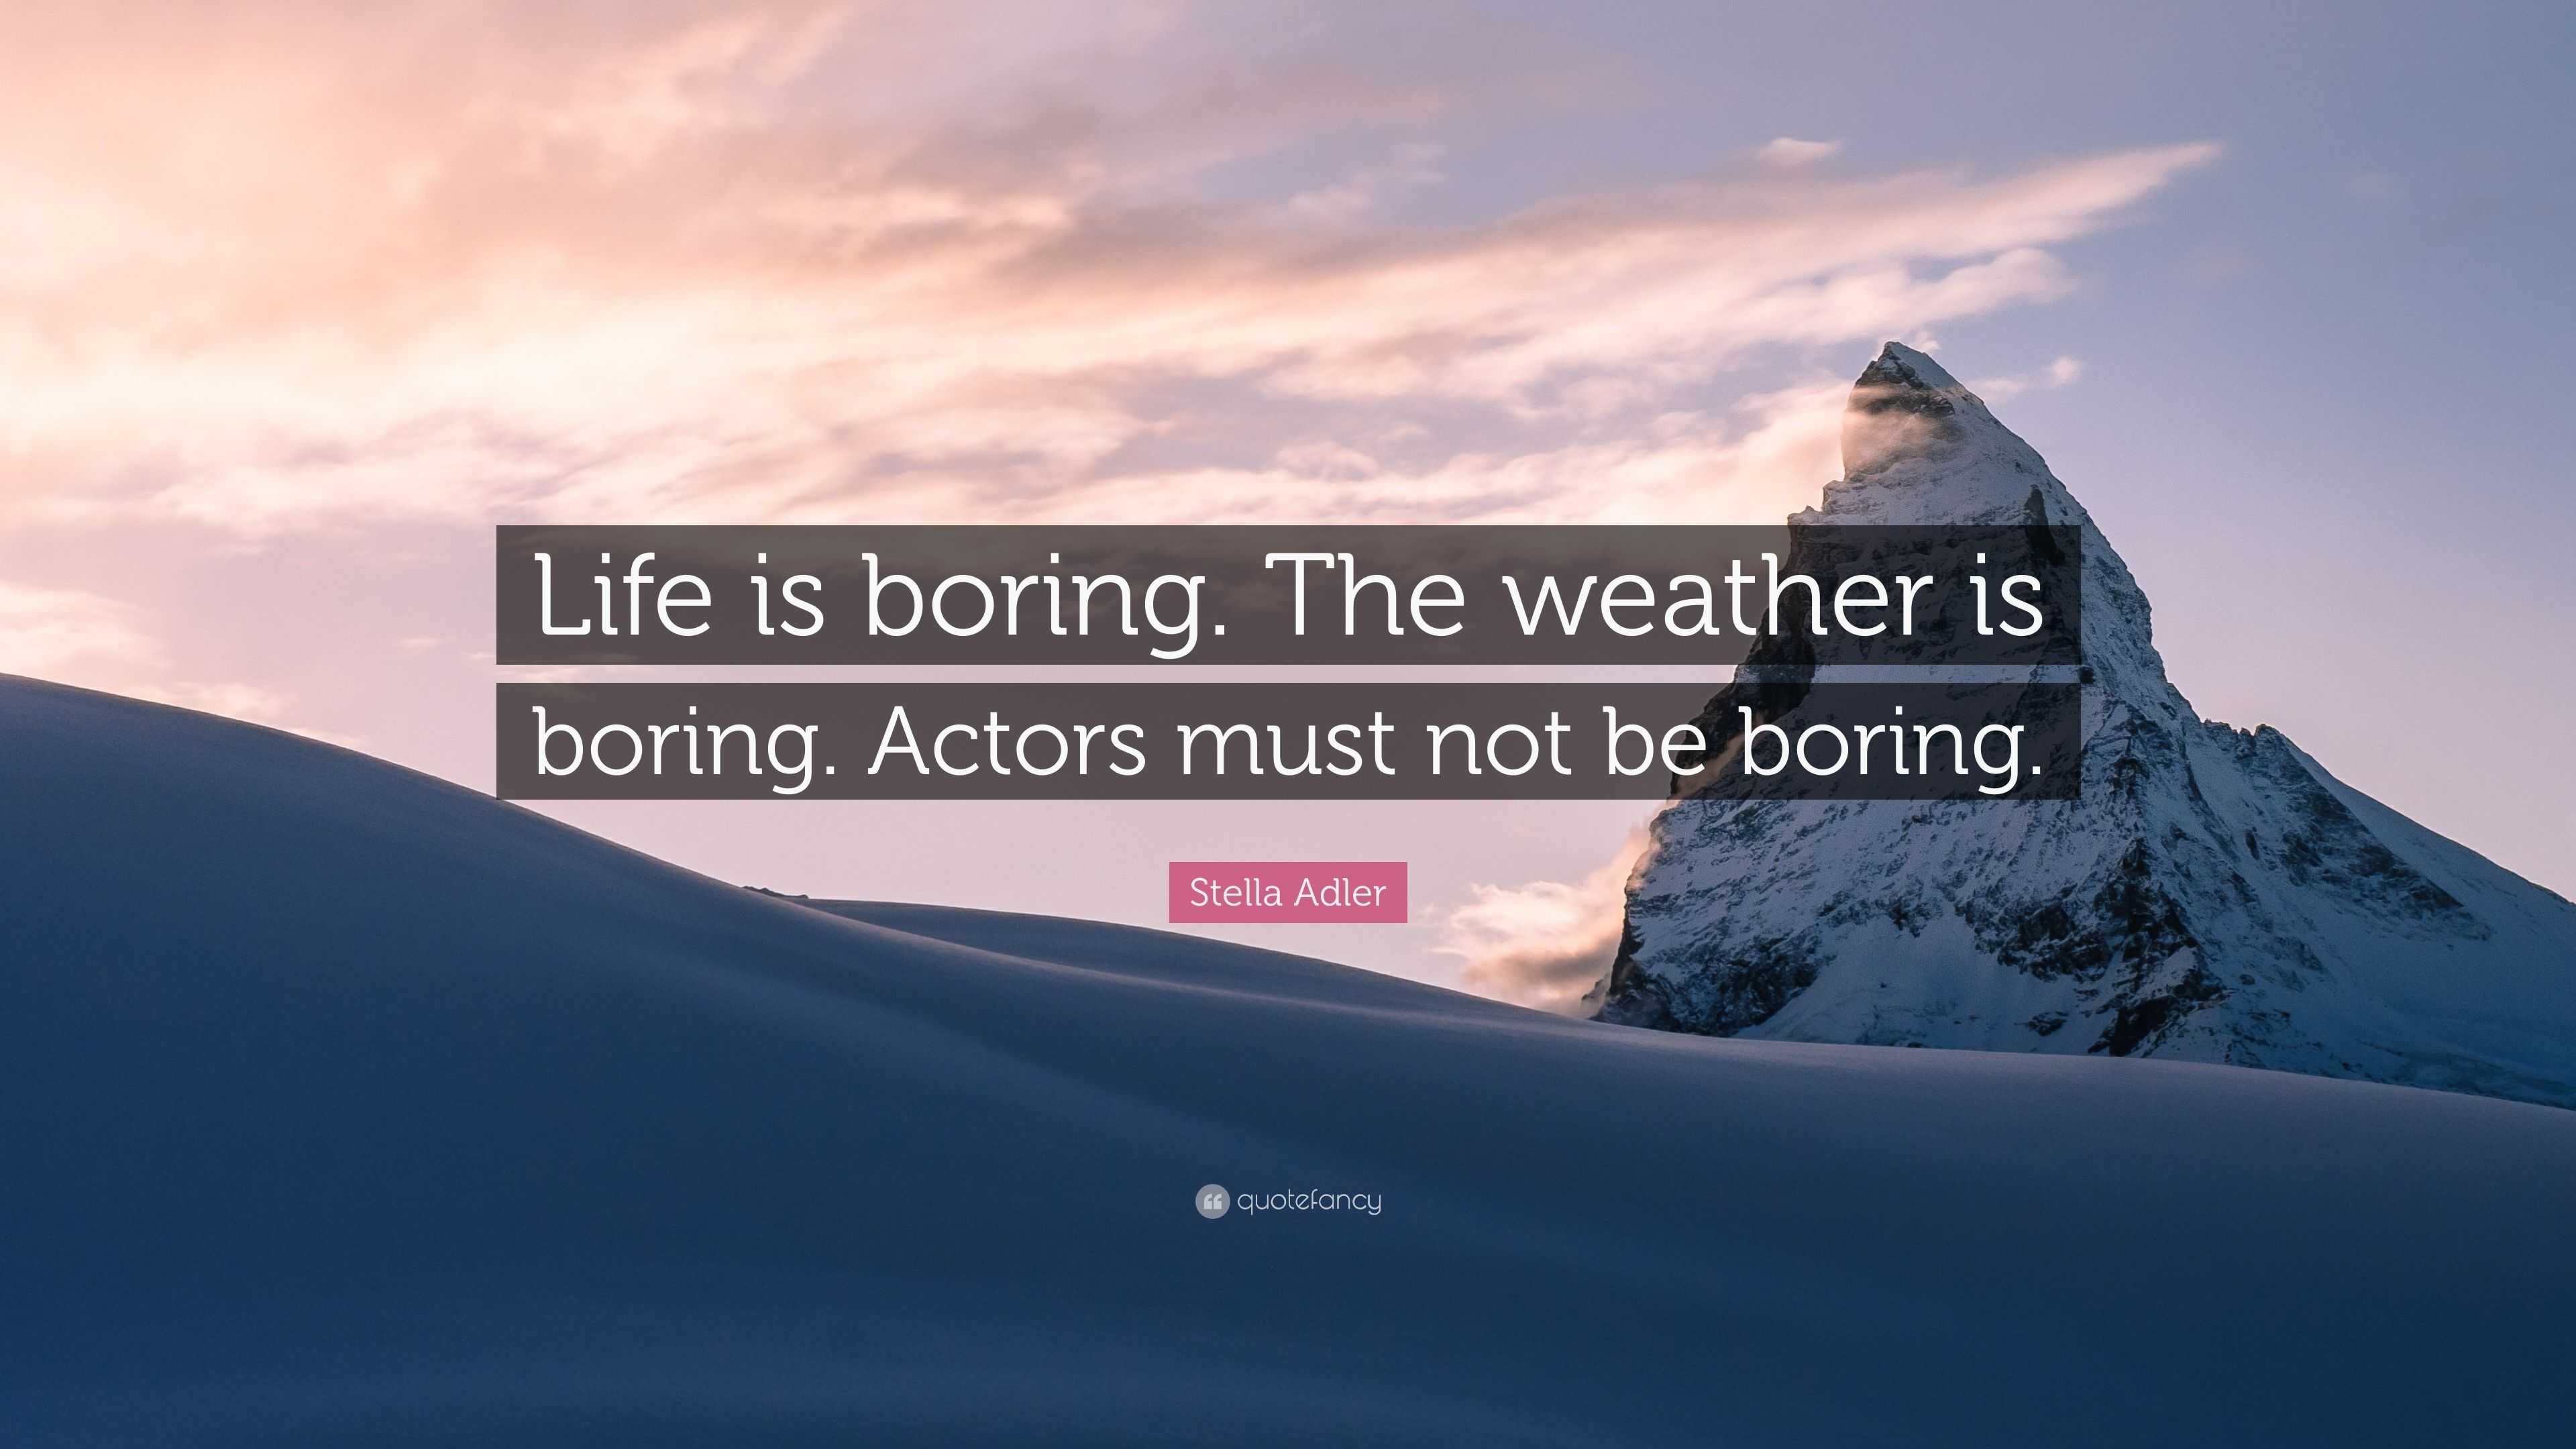 Stella Adler Quote: "Life is boring. The weather is boring. Actors must not be boring." (7 ...